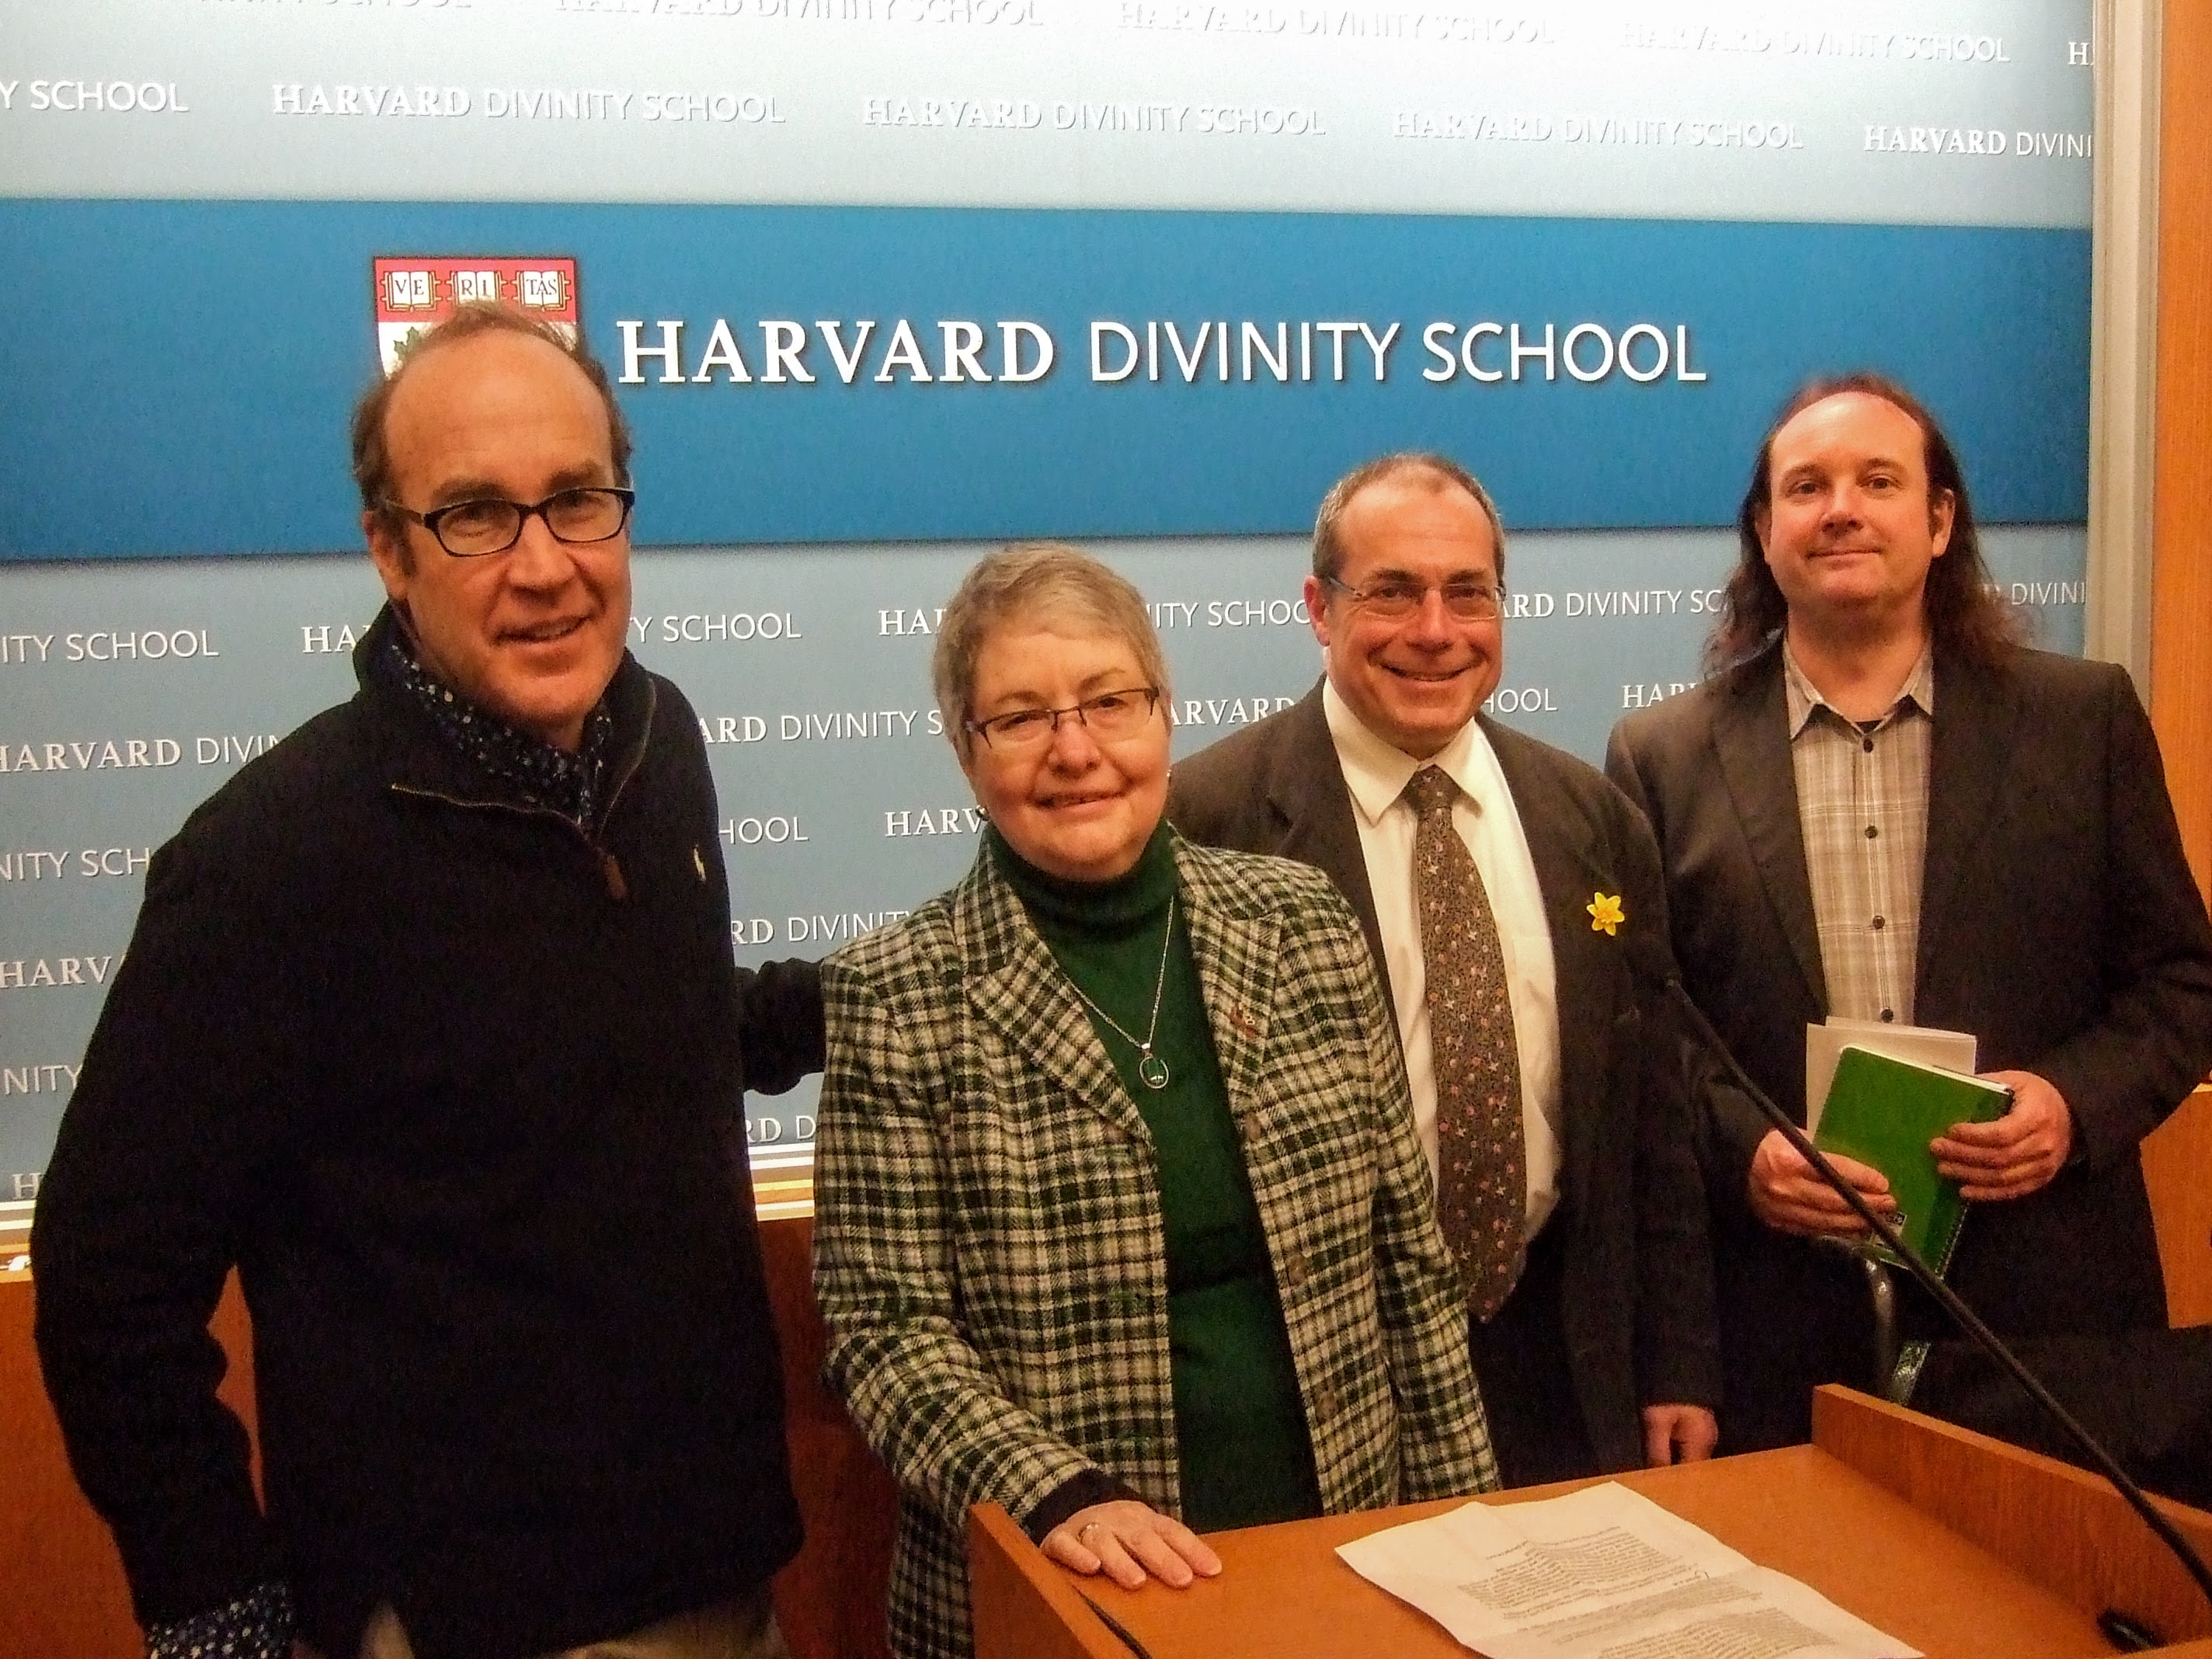 Left to Right: Michael Conti, Beverly Kienzle, George Ferzoco, Robert Hensley-King at The Unruly Mystic Screening at Harvard Divinity School, 2015.